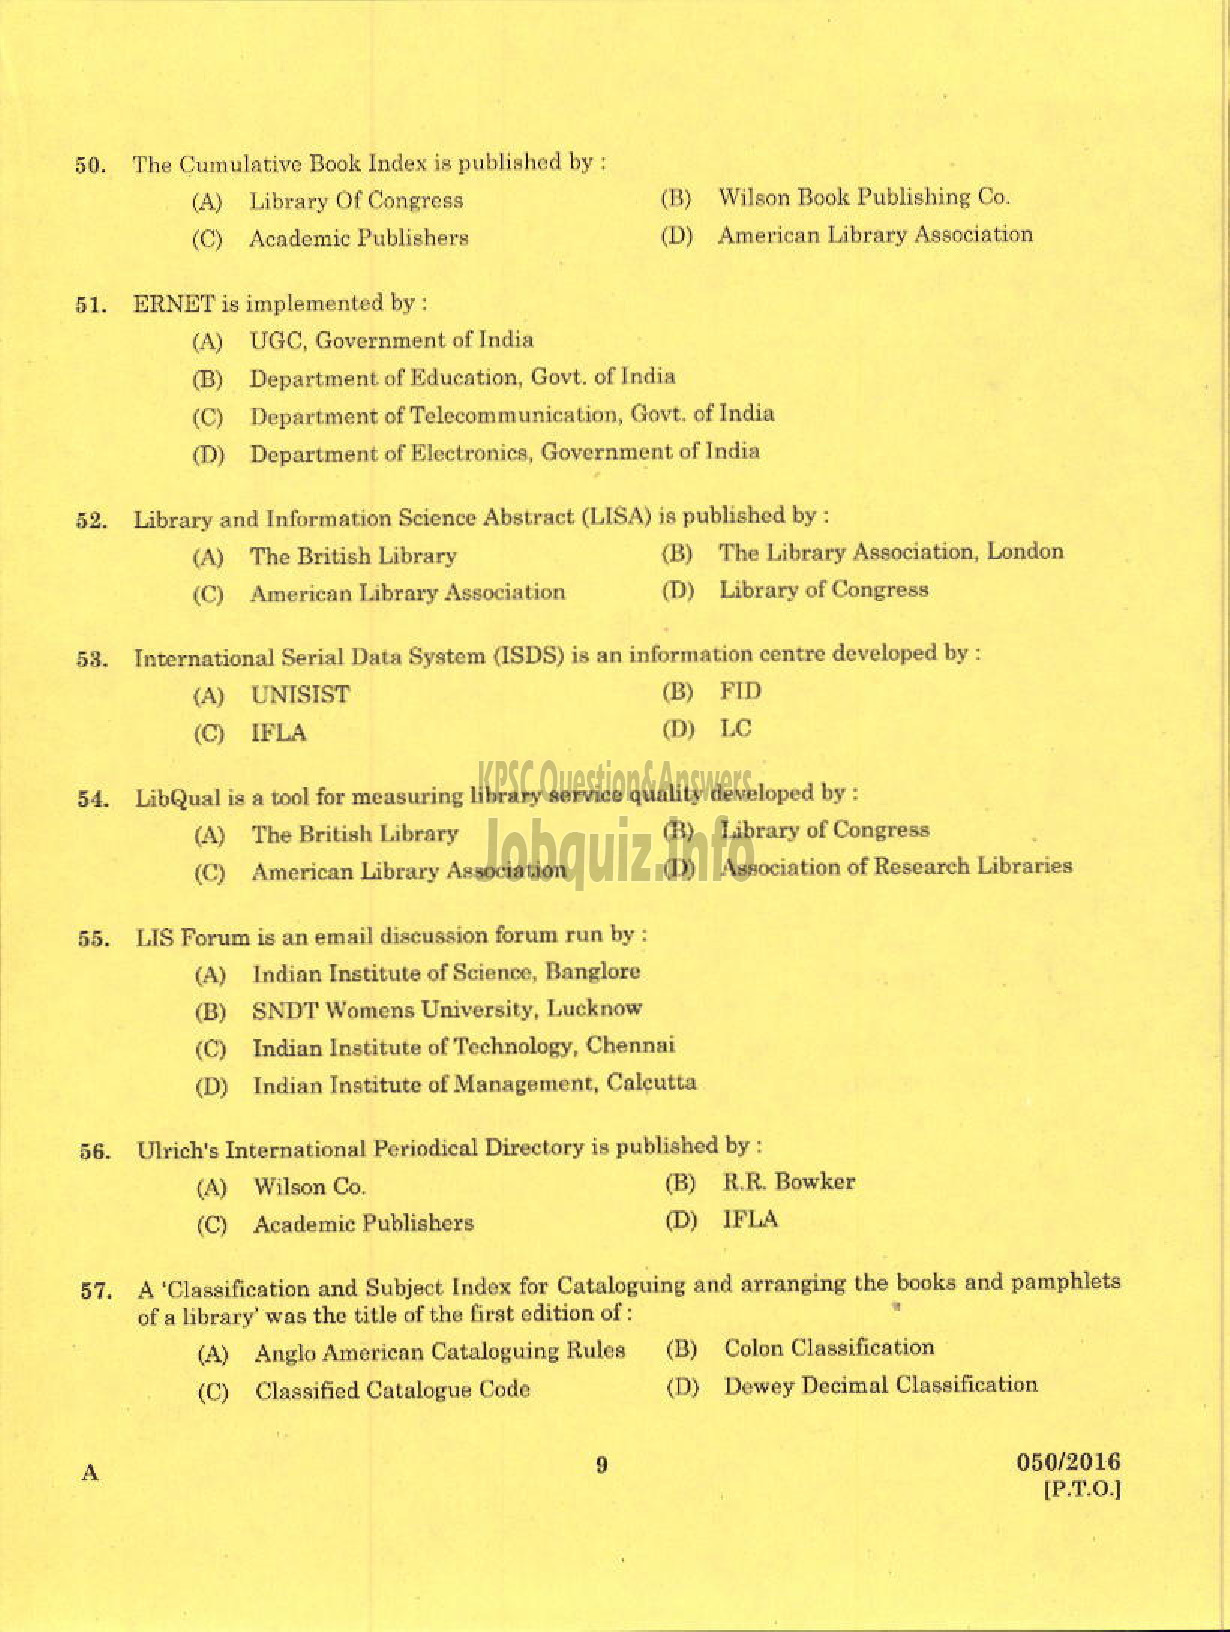 Kerala PSC Question Paper - LIBRARIAN GR IV KERALA STATE CENTRAL LIBRARY-7